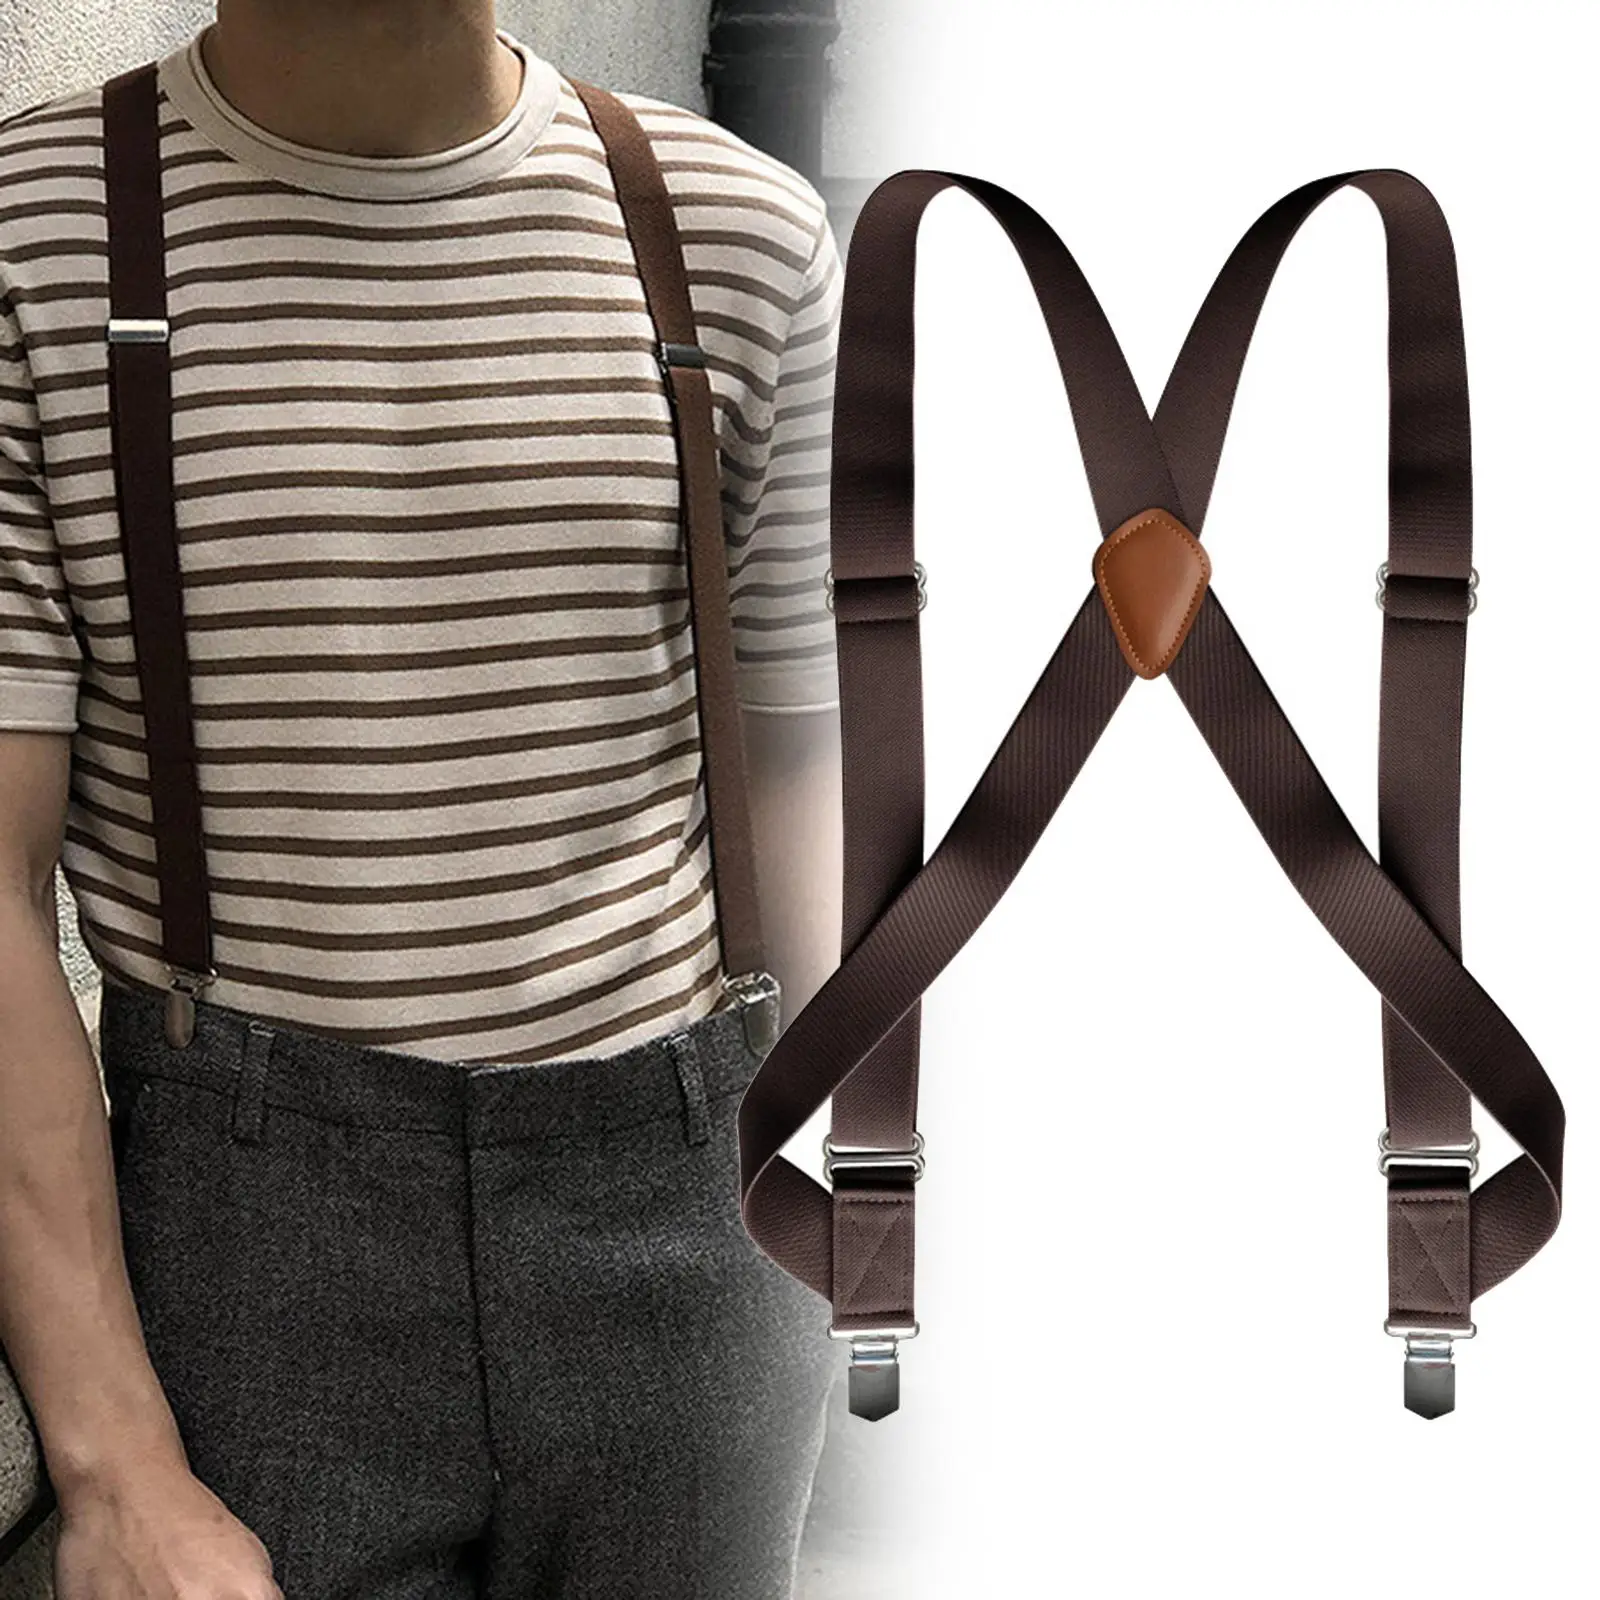 Mens Suspender with Clips Pants Holder Men Gifts Washable Reusable Adjustable Suspenders for Shorts Friends Orchestra Band Prom